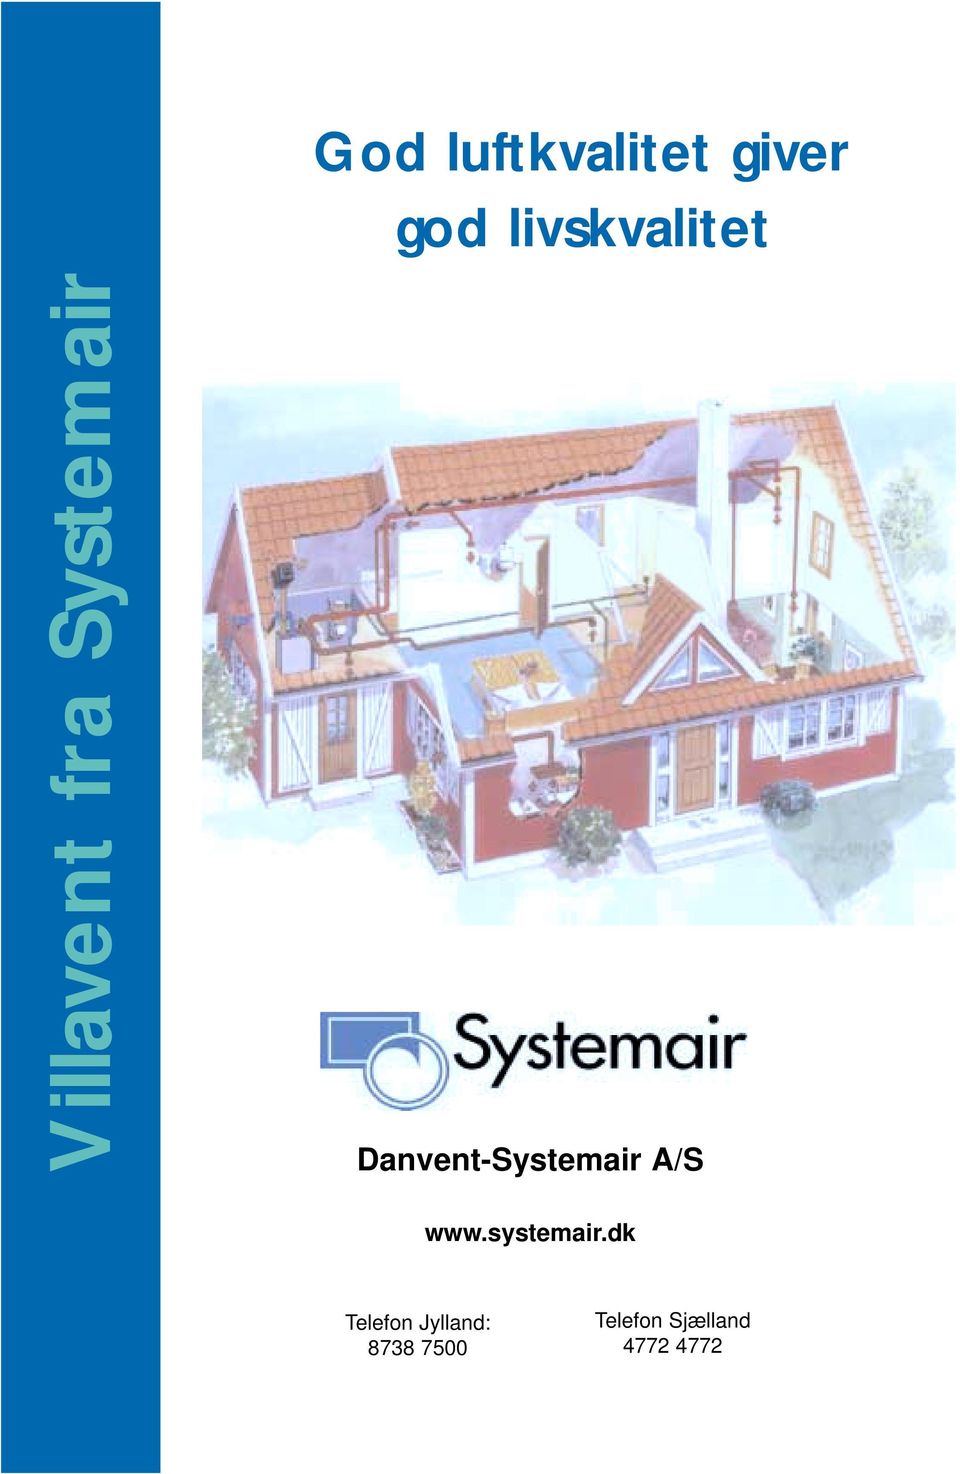 Danvent-Systemair A/S www.systemair.